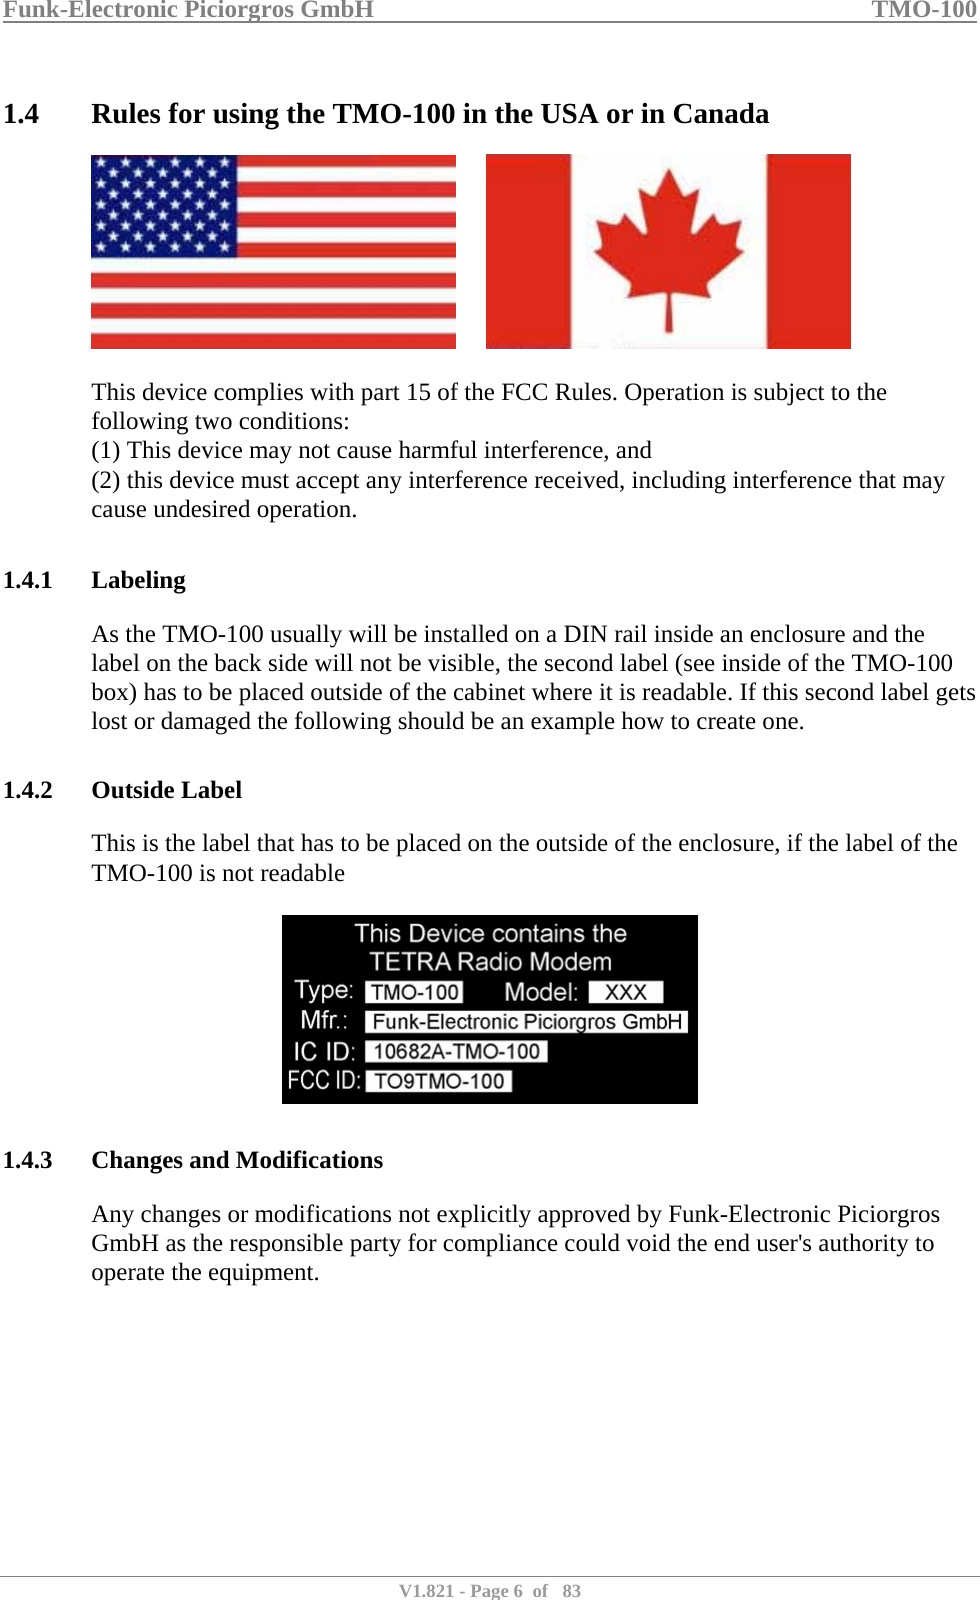 Funk-Electronic Piciorgros GmbH   TMO-100   V1.821 - Page 6  of   83   1.4 Rules for using the TMO-100 in the USA or in Canada          This device complies with part 15 of the FCC Rules. Operation is subject to the following two conditions:  (1) This device may not cause harmful interference, and  (2) this device must accept any interference received, including interference that may cause undesired operation.   1.4.1 Labeling As the TMO-100 usually will be installed on a DIN rail inside an enclosure and the label on the back side will not be visible, the second label (see inside of the TMO-100 box) has to be placed outside of the cabinet where it is readable. If this second label gets lost or damaged the following should be an example how to create one.  1.4.2 Outside Label This is the label that has to be placed on the outside of the enclosure, if the label of the TMO-100 is not readable    1.4.3 Changes and Modifications Any changes or modifications not explicitly approved by Funk-Electronic Piciorgros GmbH as the responsible party for compliance could void the end user&apos;s authority to operate the equipment.           